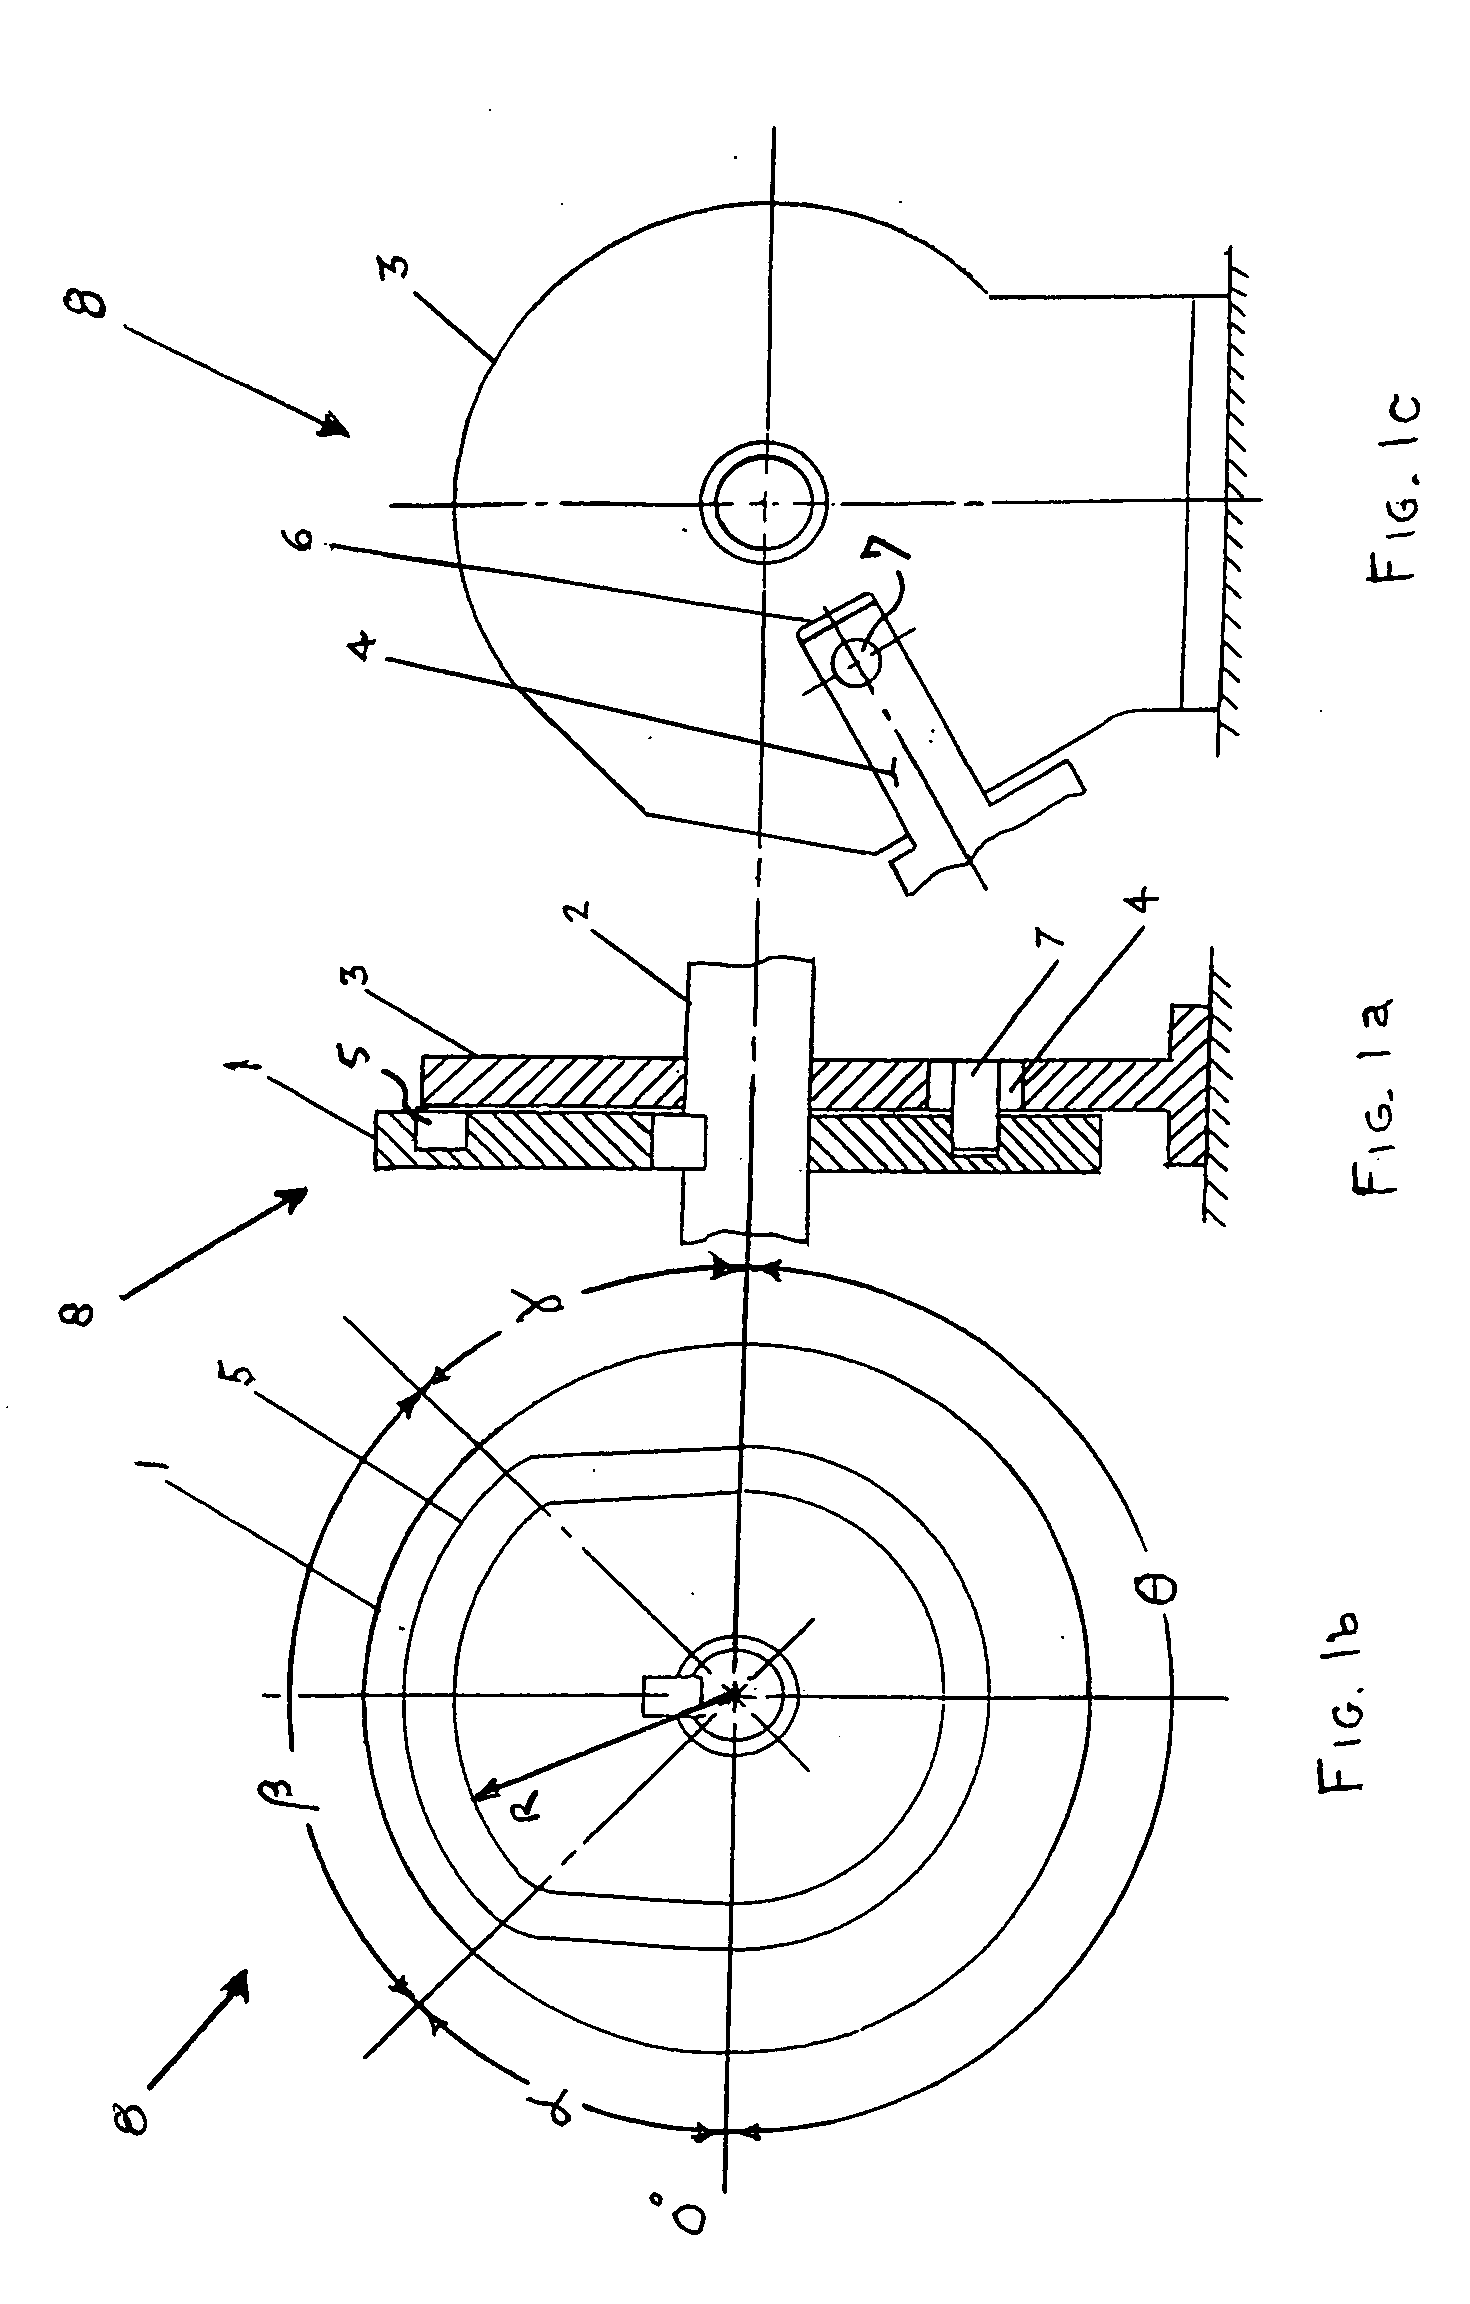 System and method for controlling engine valve lift and valve opening percentage